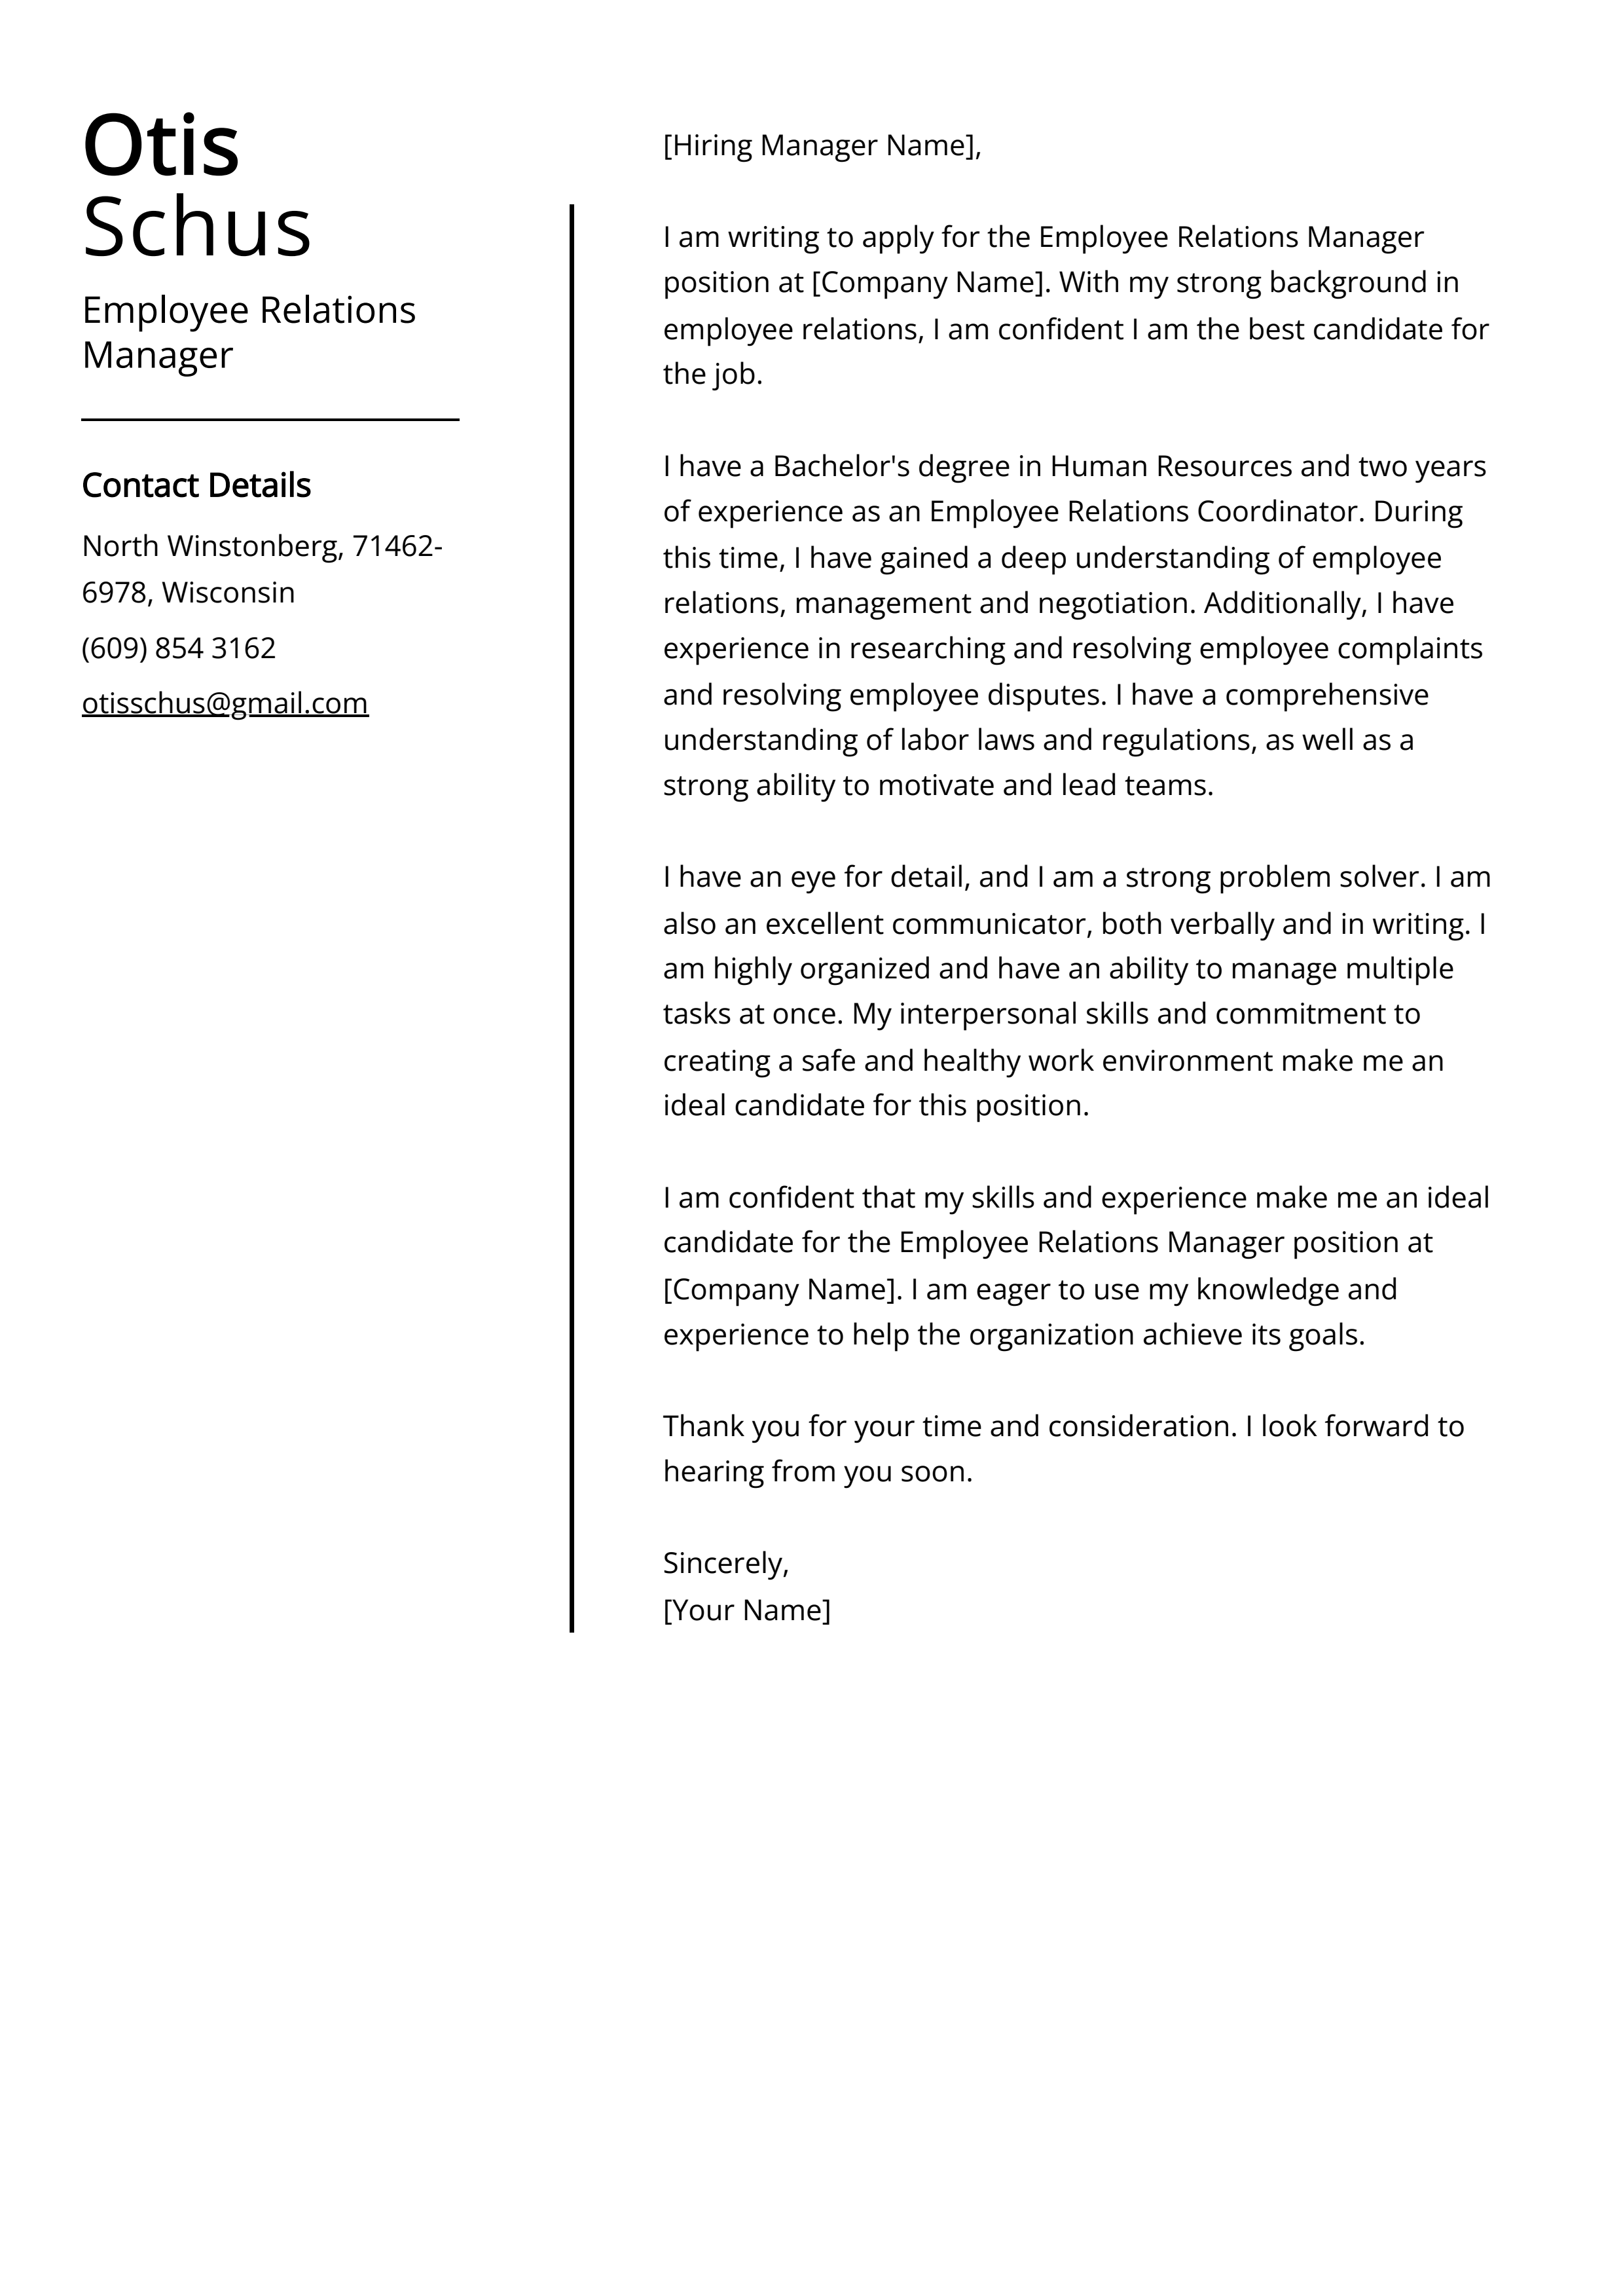 Employee Relations Manager Cover Letter Example